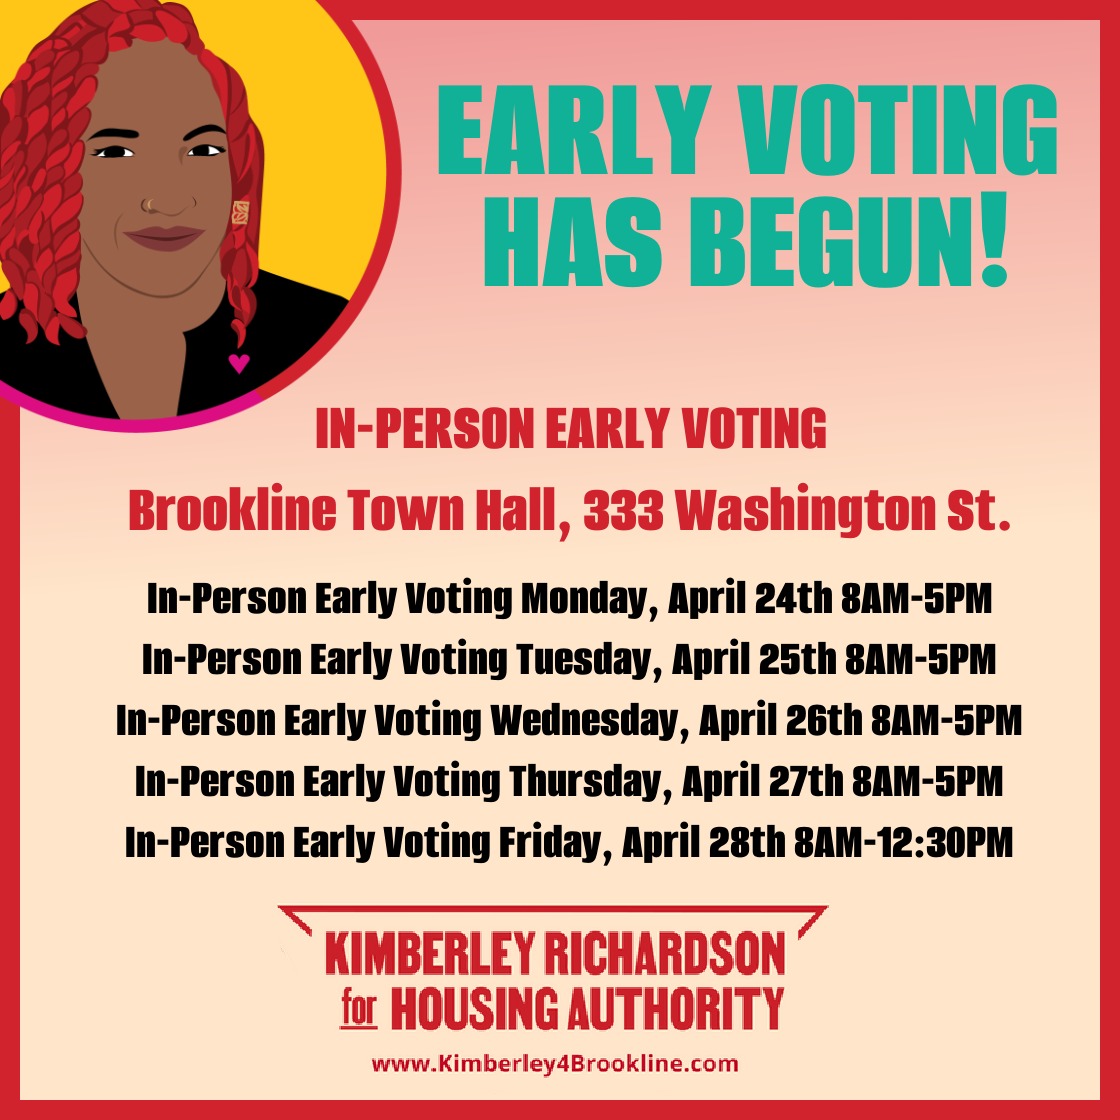 In-Person Early Voting Has Begun!!! 
Please consider me when you go vote! #livedexperience #representationmatters #ampliflyblackvoices #aseatatthetable #brookline #prioritizeresidents #change